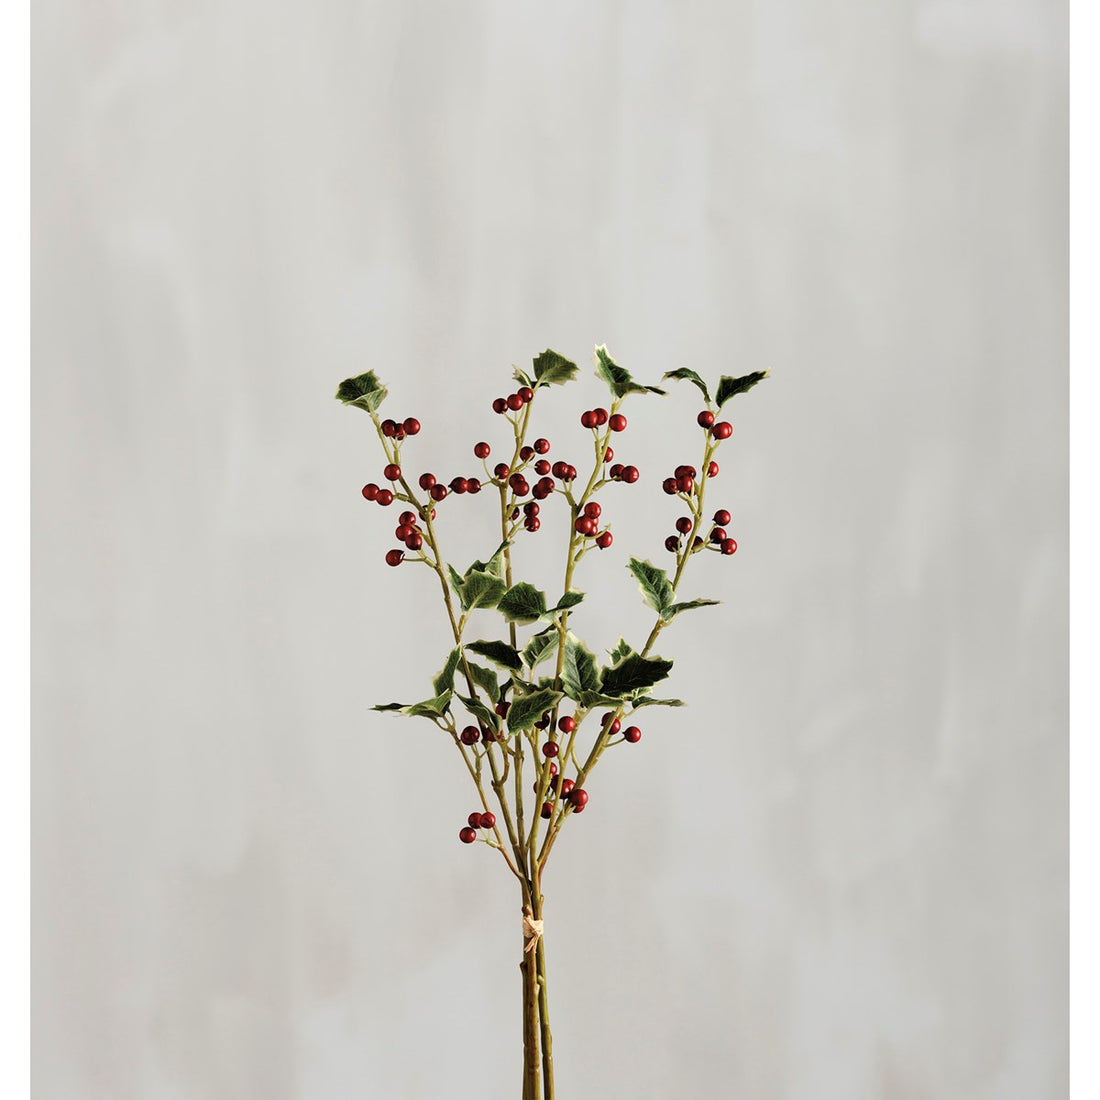 Holly Berry Stems Bouquet – Flowers and Gray